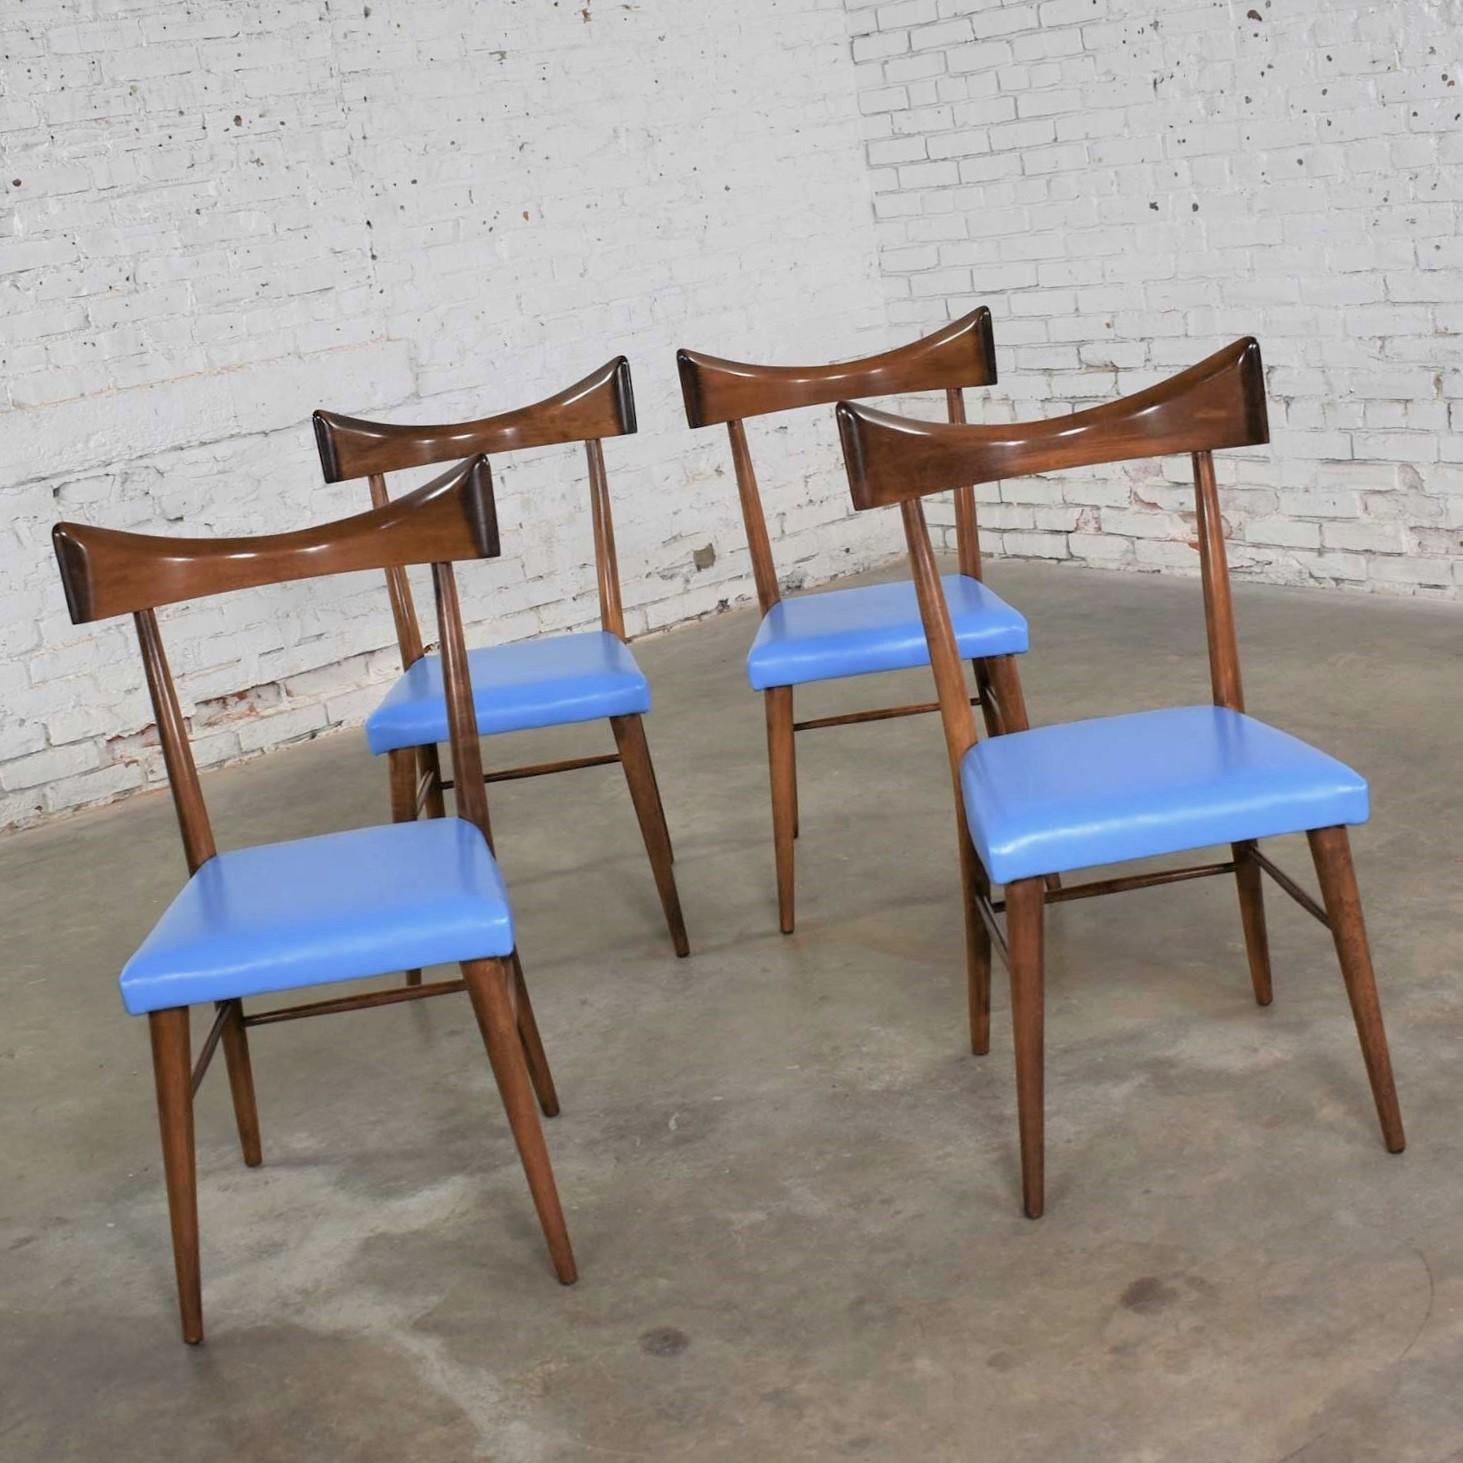 Handsome set of four Mid-Century Modern dining chairs #1534 for the Planner Group designed by Paul McCobb for Winchendon. They are in fabulous original vintage condition and wear their original bright blue vinyl upholstery on their foam seats. That